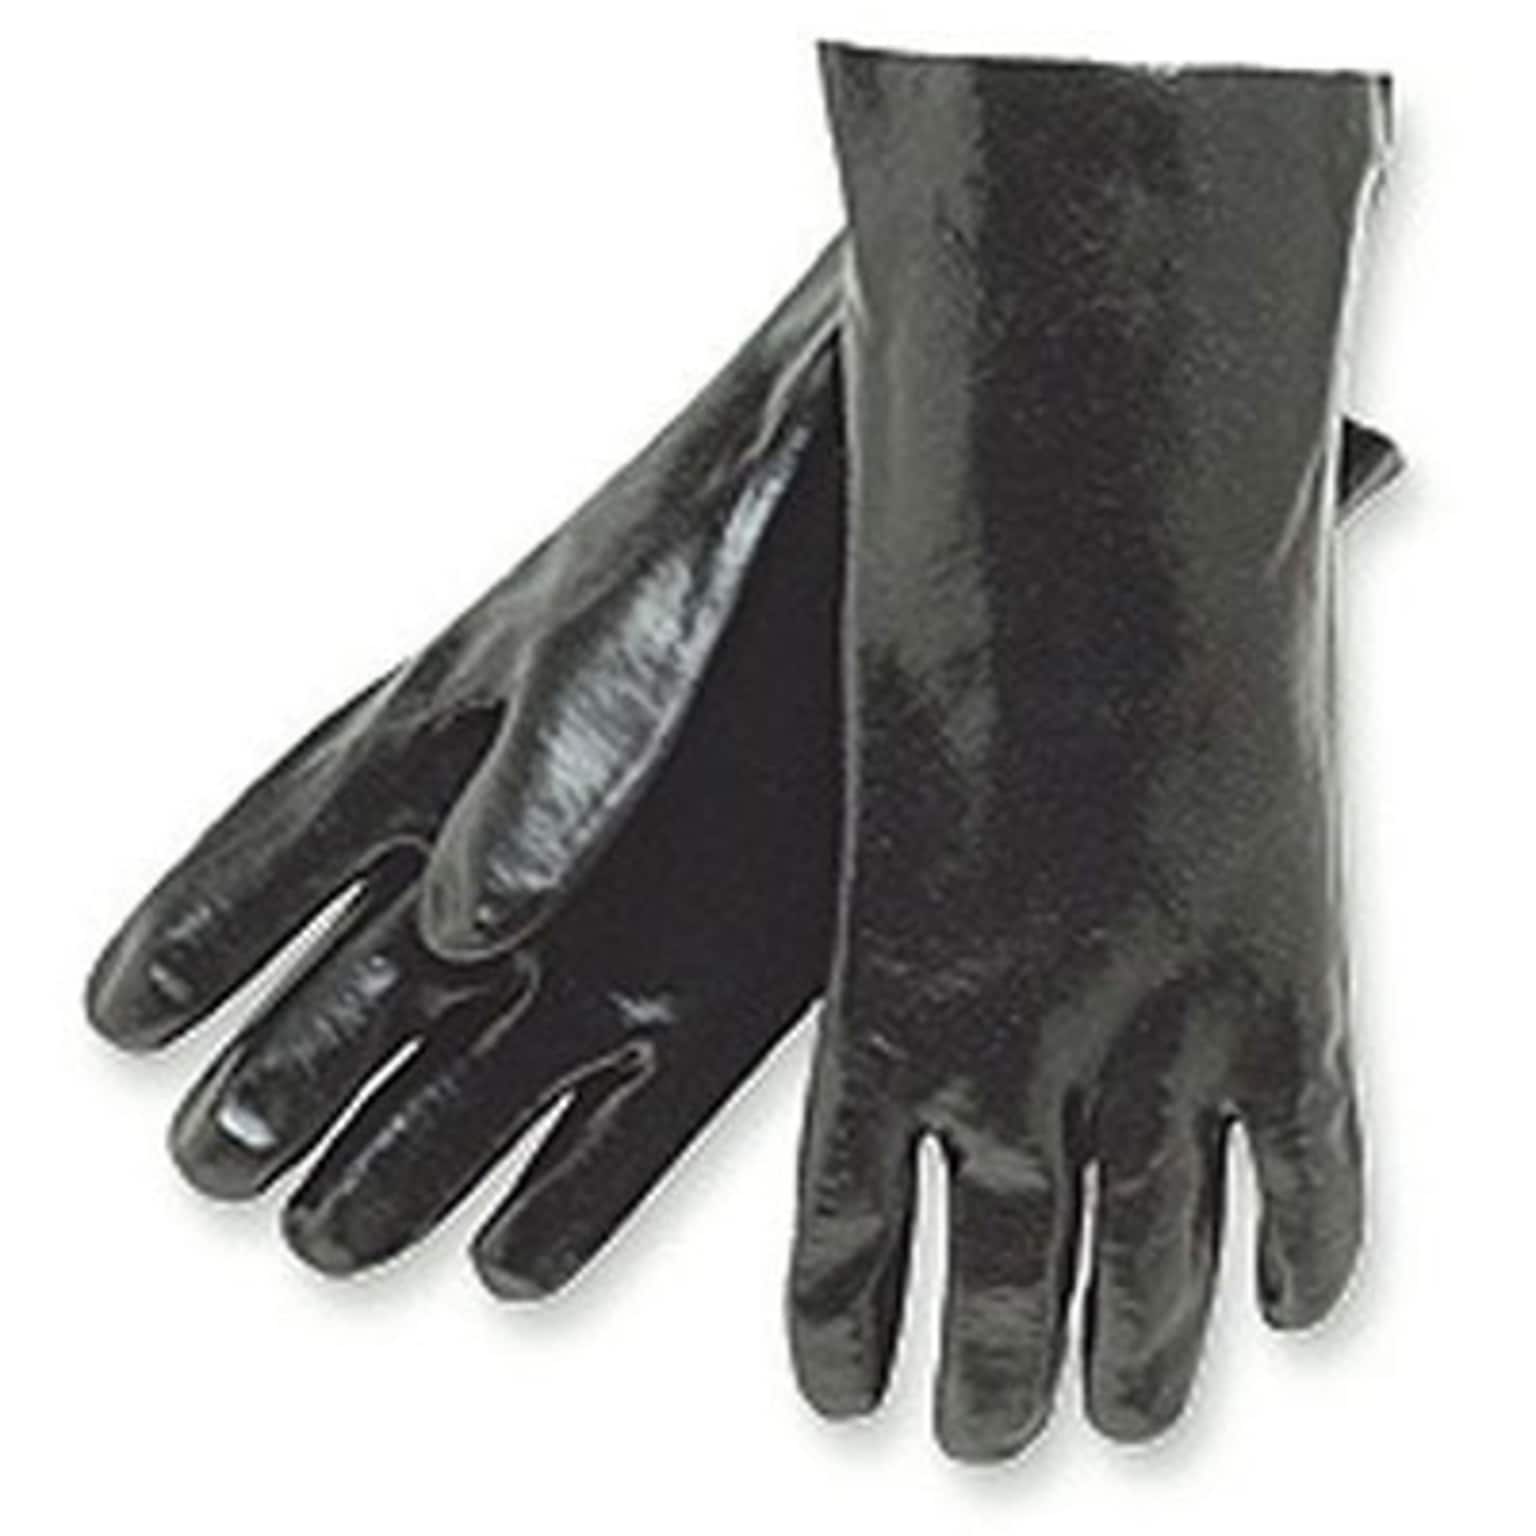 Memphis Gloves Dipped Gloves; PVC Smooth Finish, 12 Gauntlet Cuff, Black, Large, 12 Pairs (5330S)